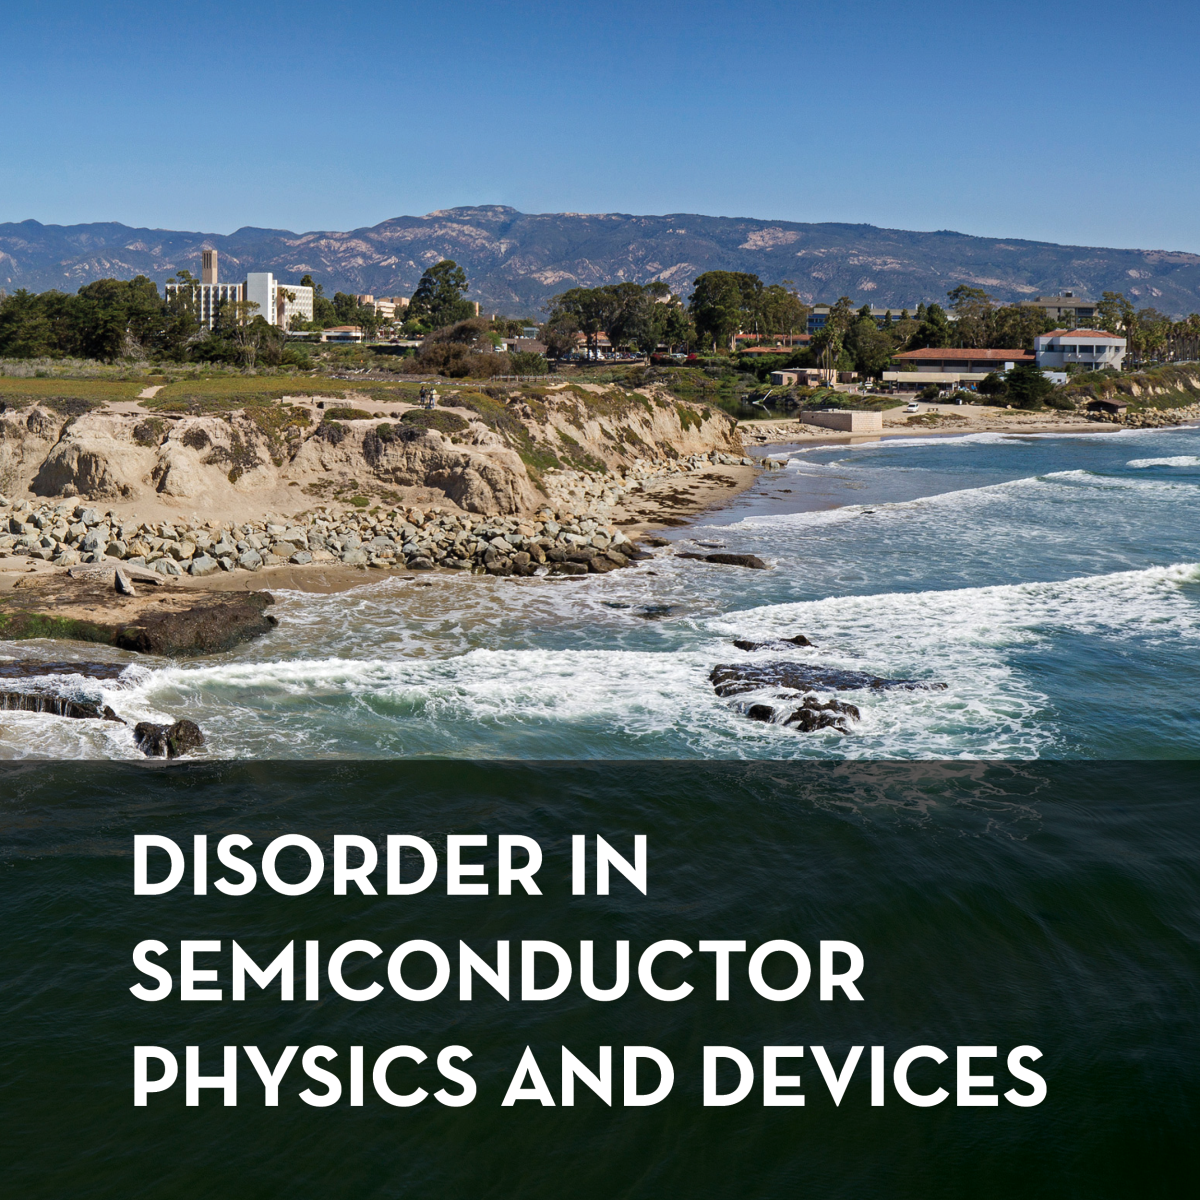 Disorder in Semiconductor Physics and Devices graphic